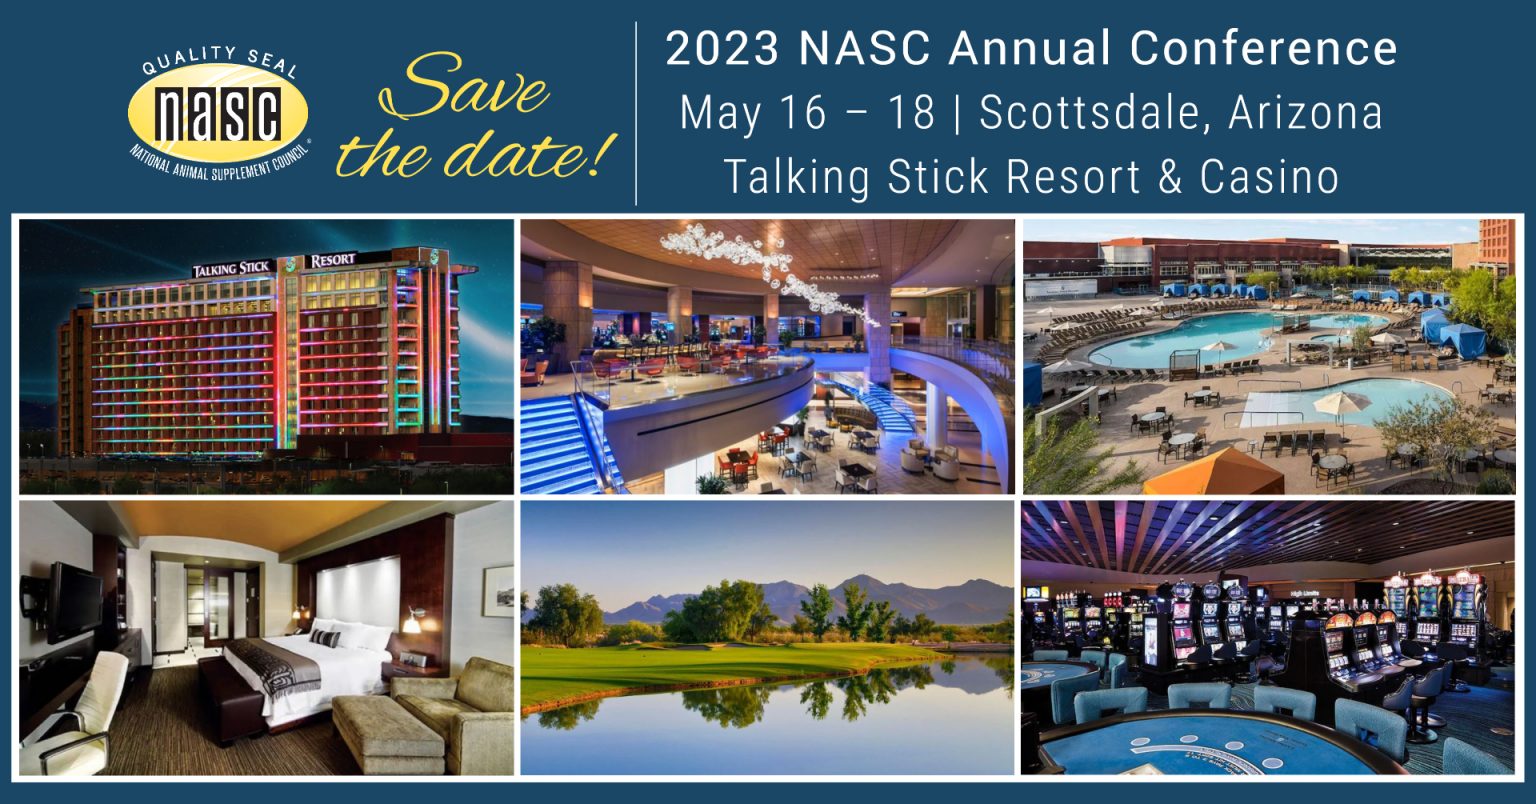 Save the Date! 2023 NASC Annual Conference Dates & Location NASC LIVE